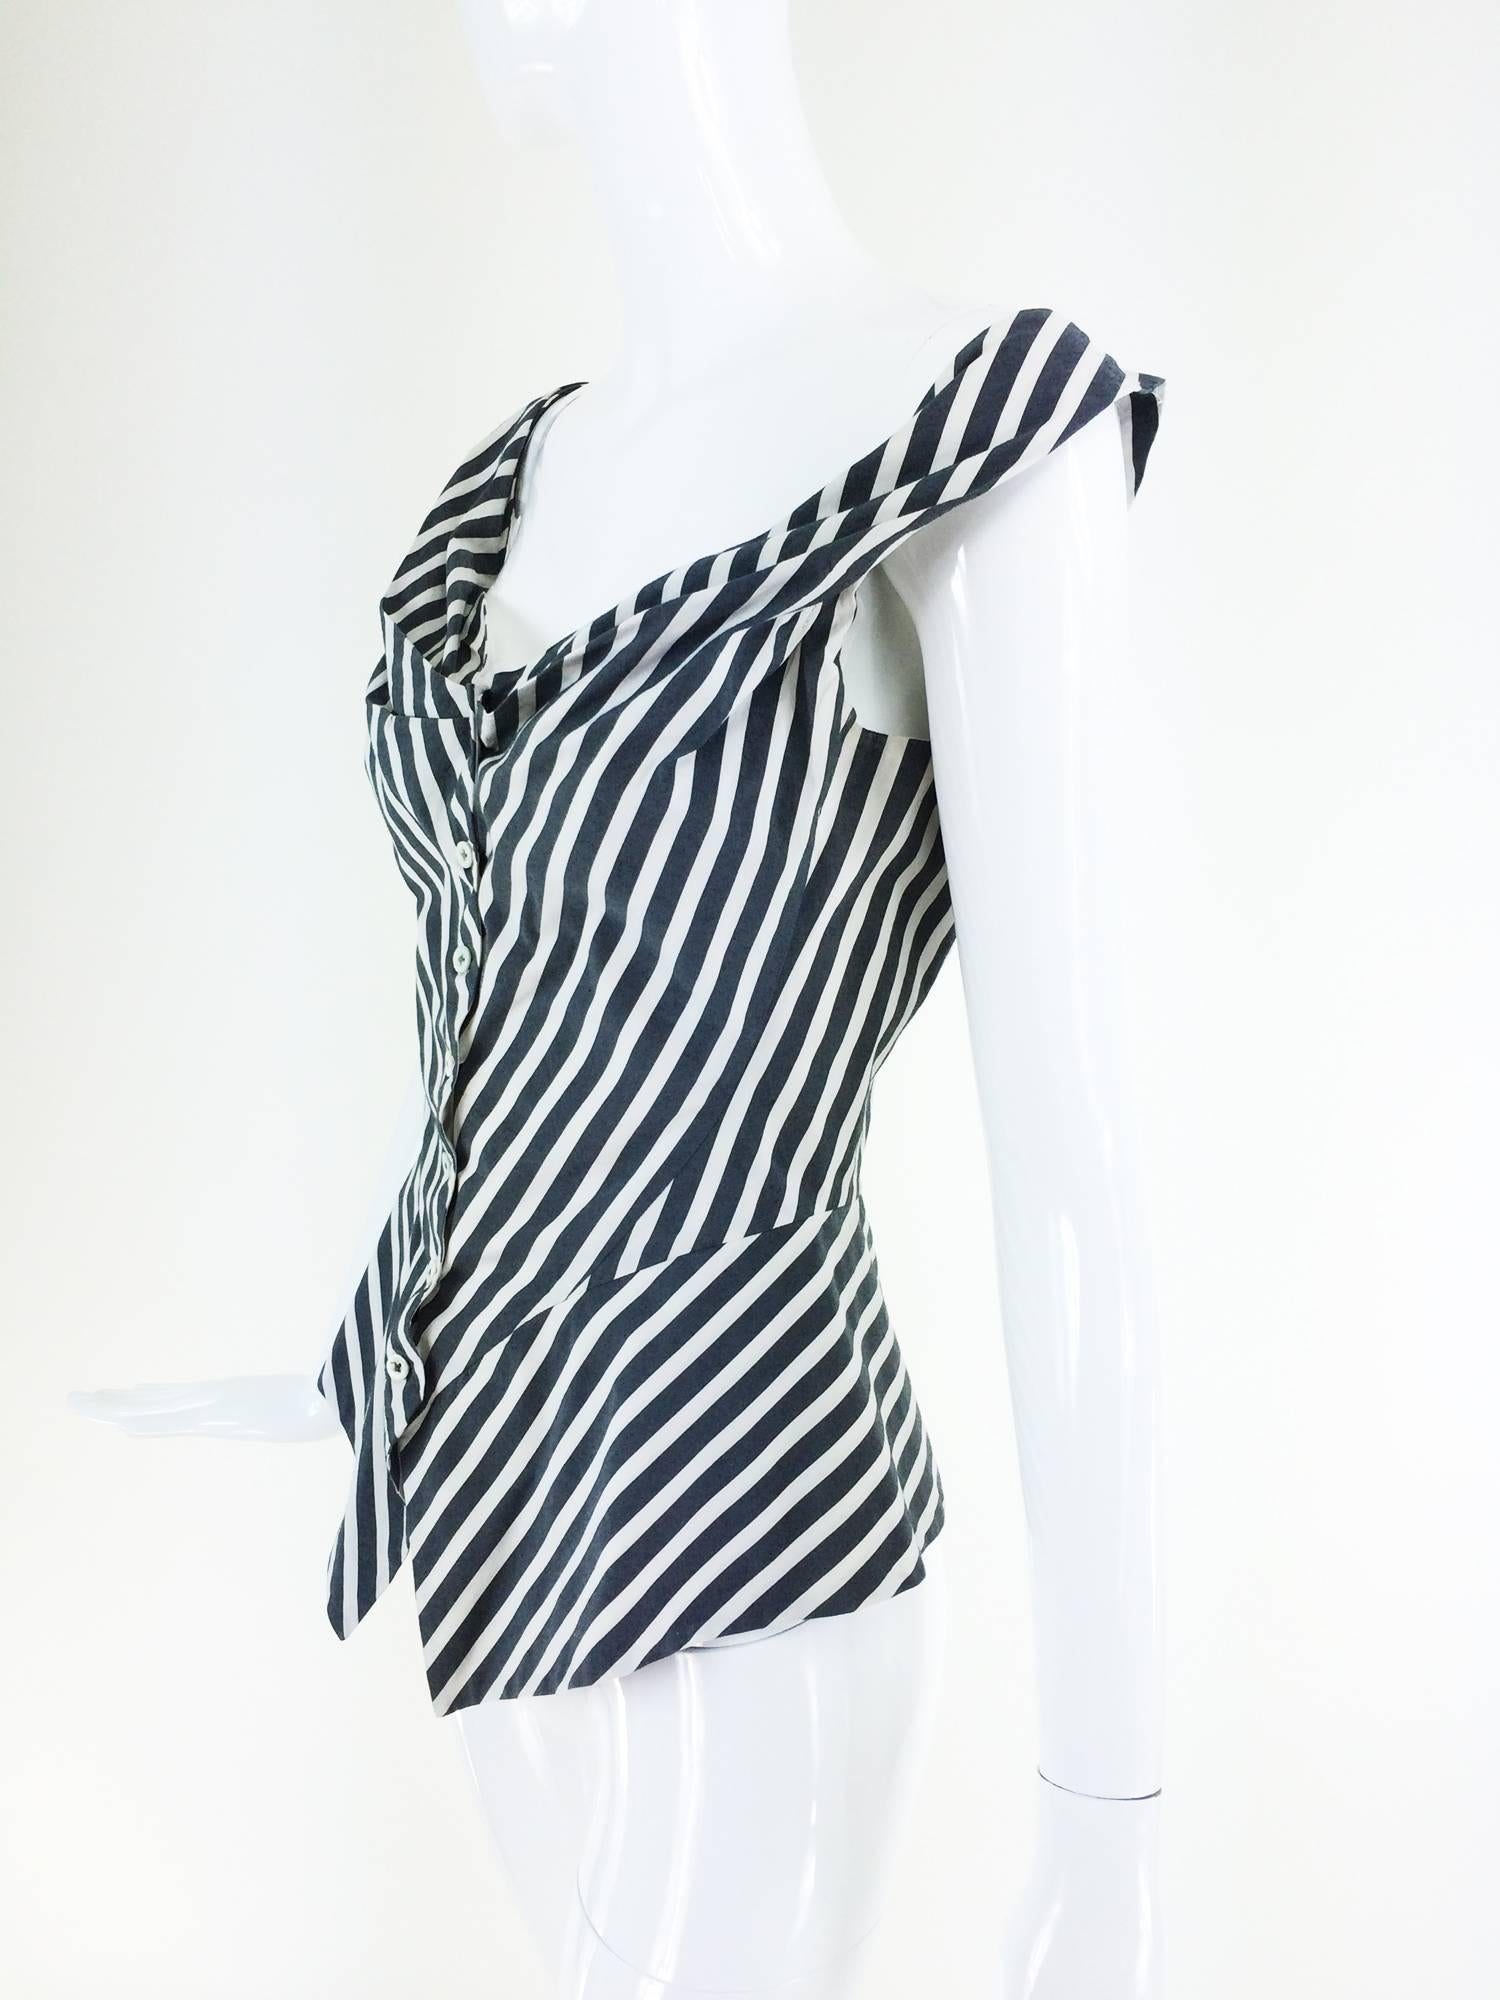 Vivienne Westwood Anglomania black & white striped corset top 1990s...Fitted corset style top in black & white striped cotton with a wide open neckline fitted torso and angled peplum...Button closure at the front, fully lined in white